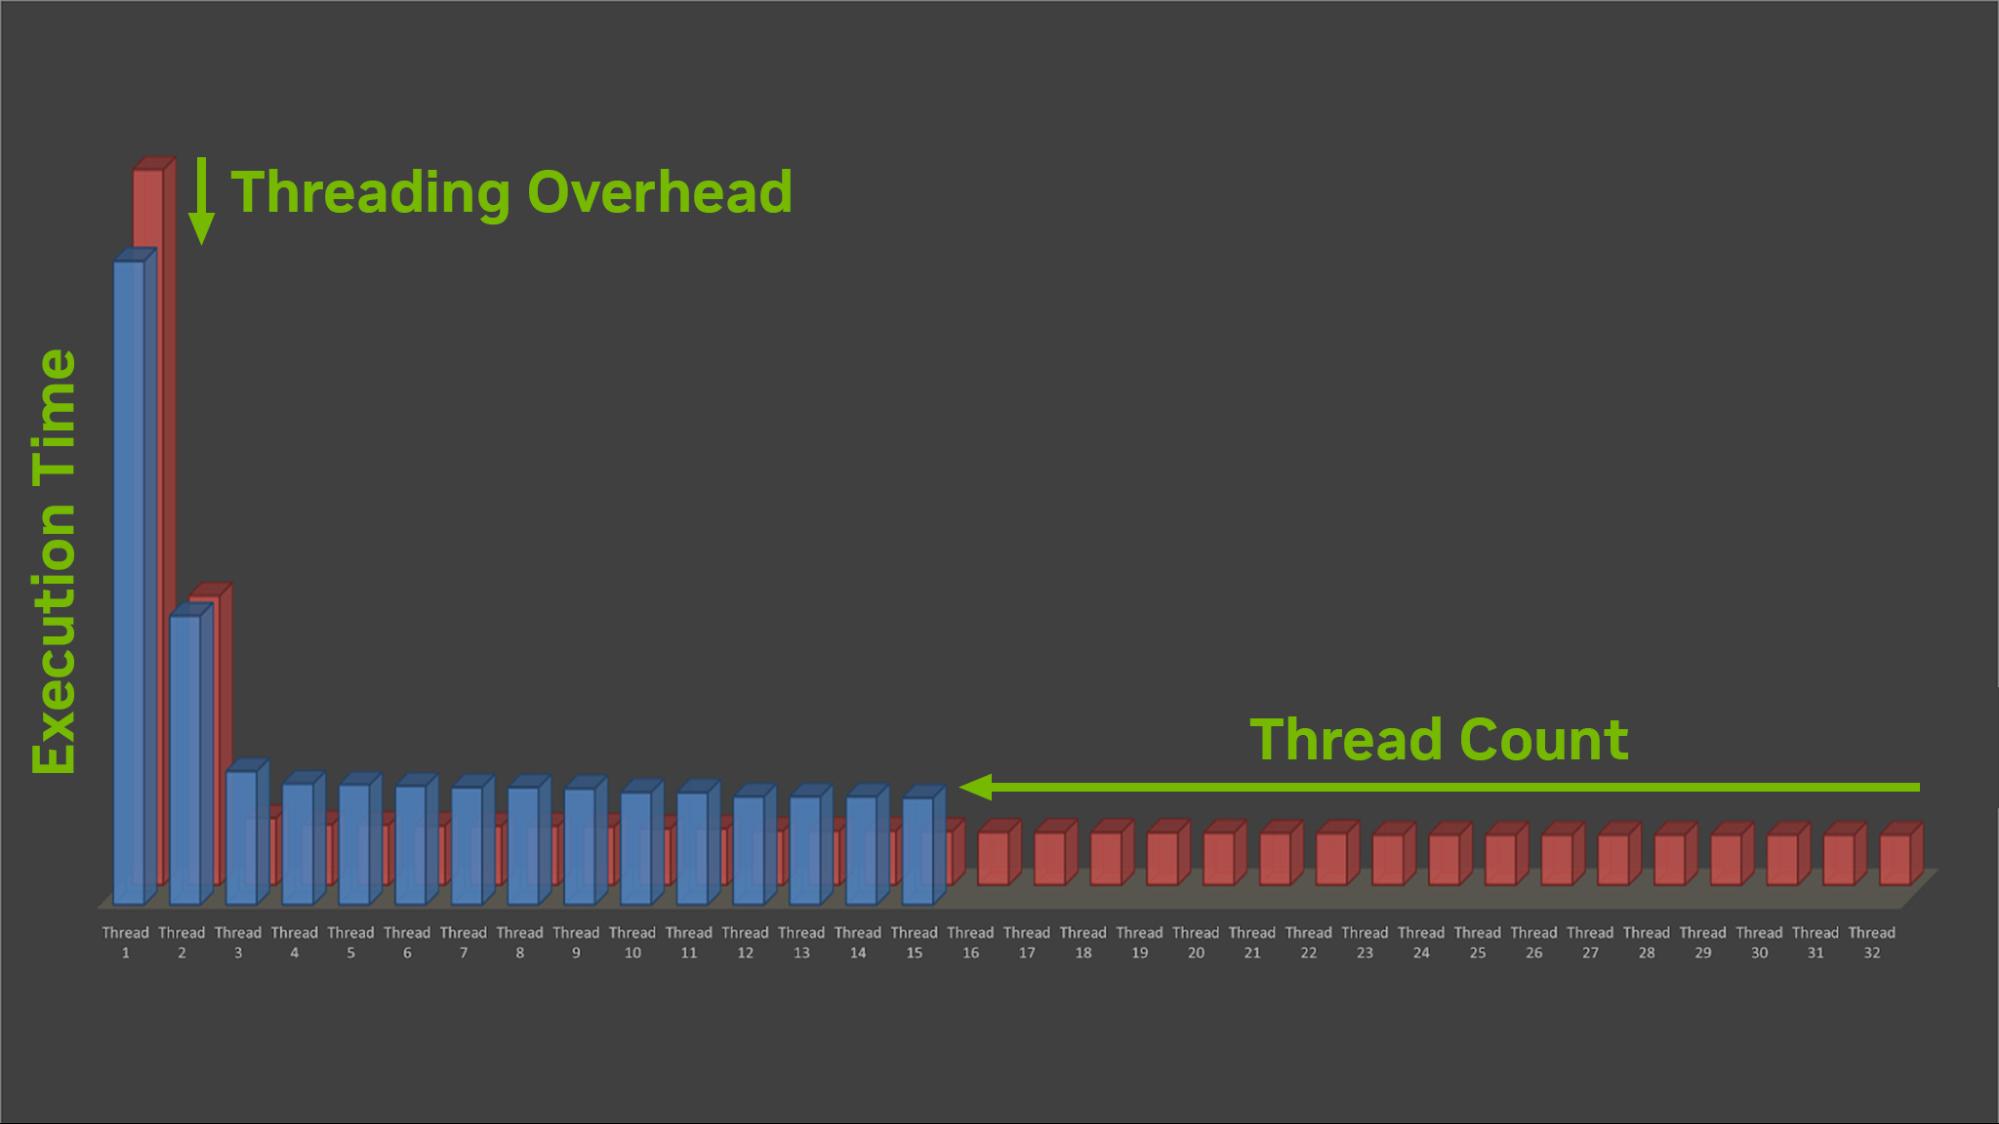 Graph shows that, by halving the thread count, overall execution time decreases due to reduced per-thread overheads.